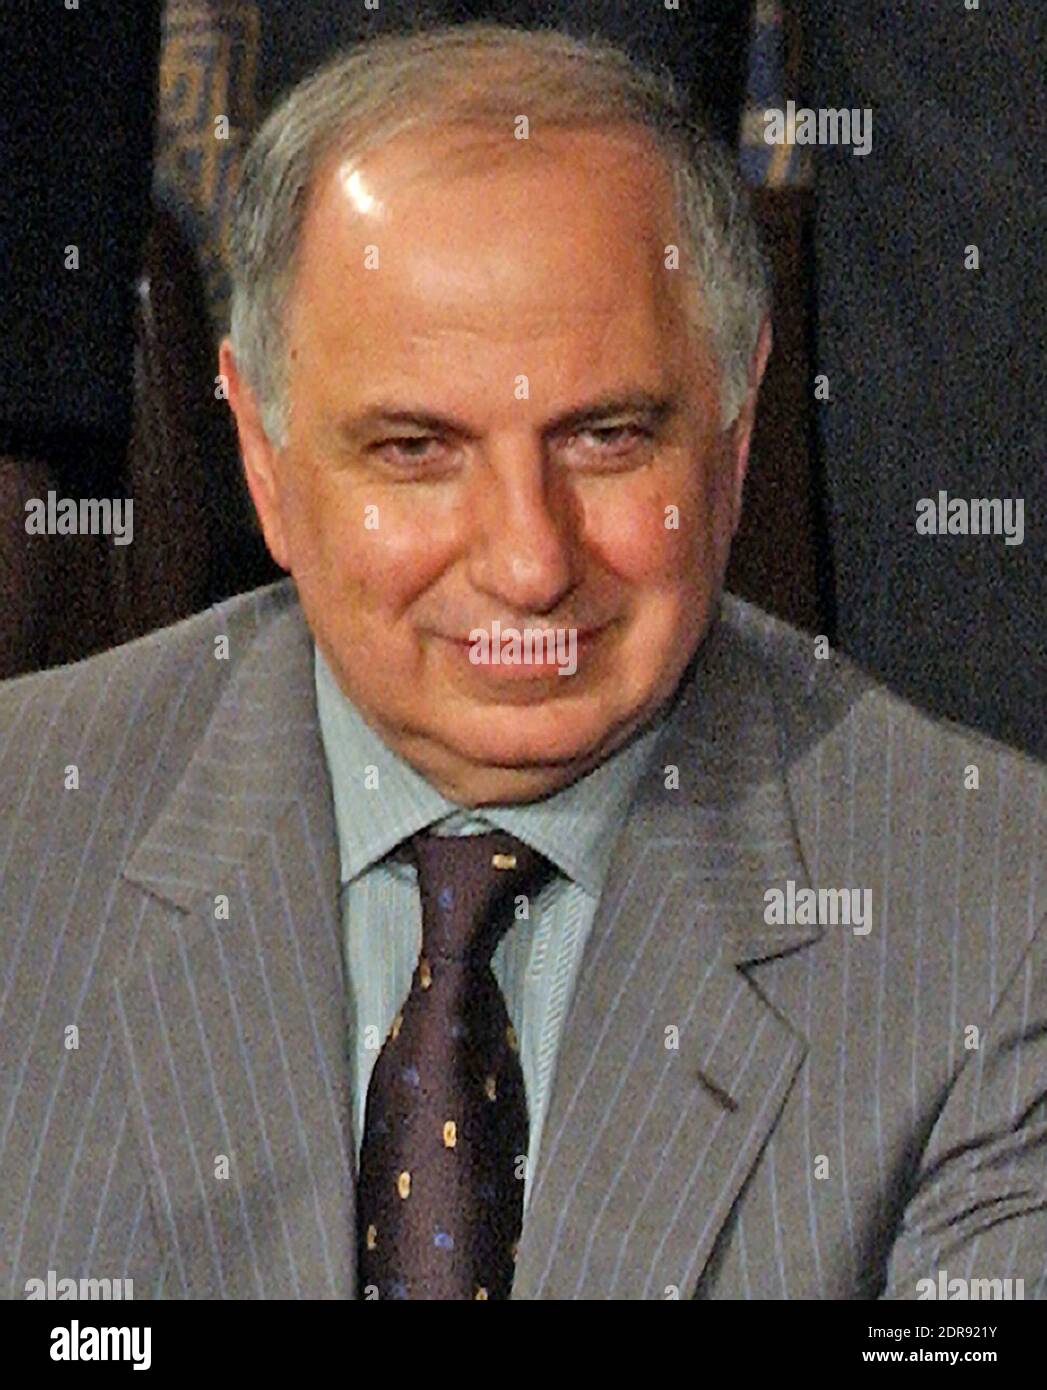 In this file photo from January 20, 2004, Doctor Ahmed Chalabi, Iraqi Governing Council is pictured as he joined first lady Laura Bush for United States President George W. Bush's 2004 State of the Union Address to a Joint Session of the United States Congress at the Capitol in Washington, DC. Iraqi state media reported Chalabi passed away from a heart attack on November 3, 2015. He was in his early 70s.Credit: Ron Sachs / CNP /ABACAPRESS.COM Stock Photo